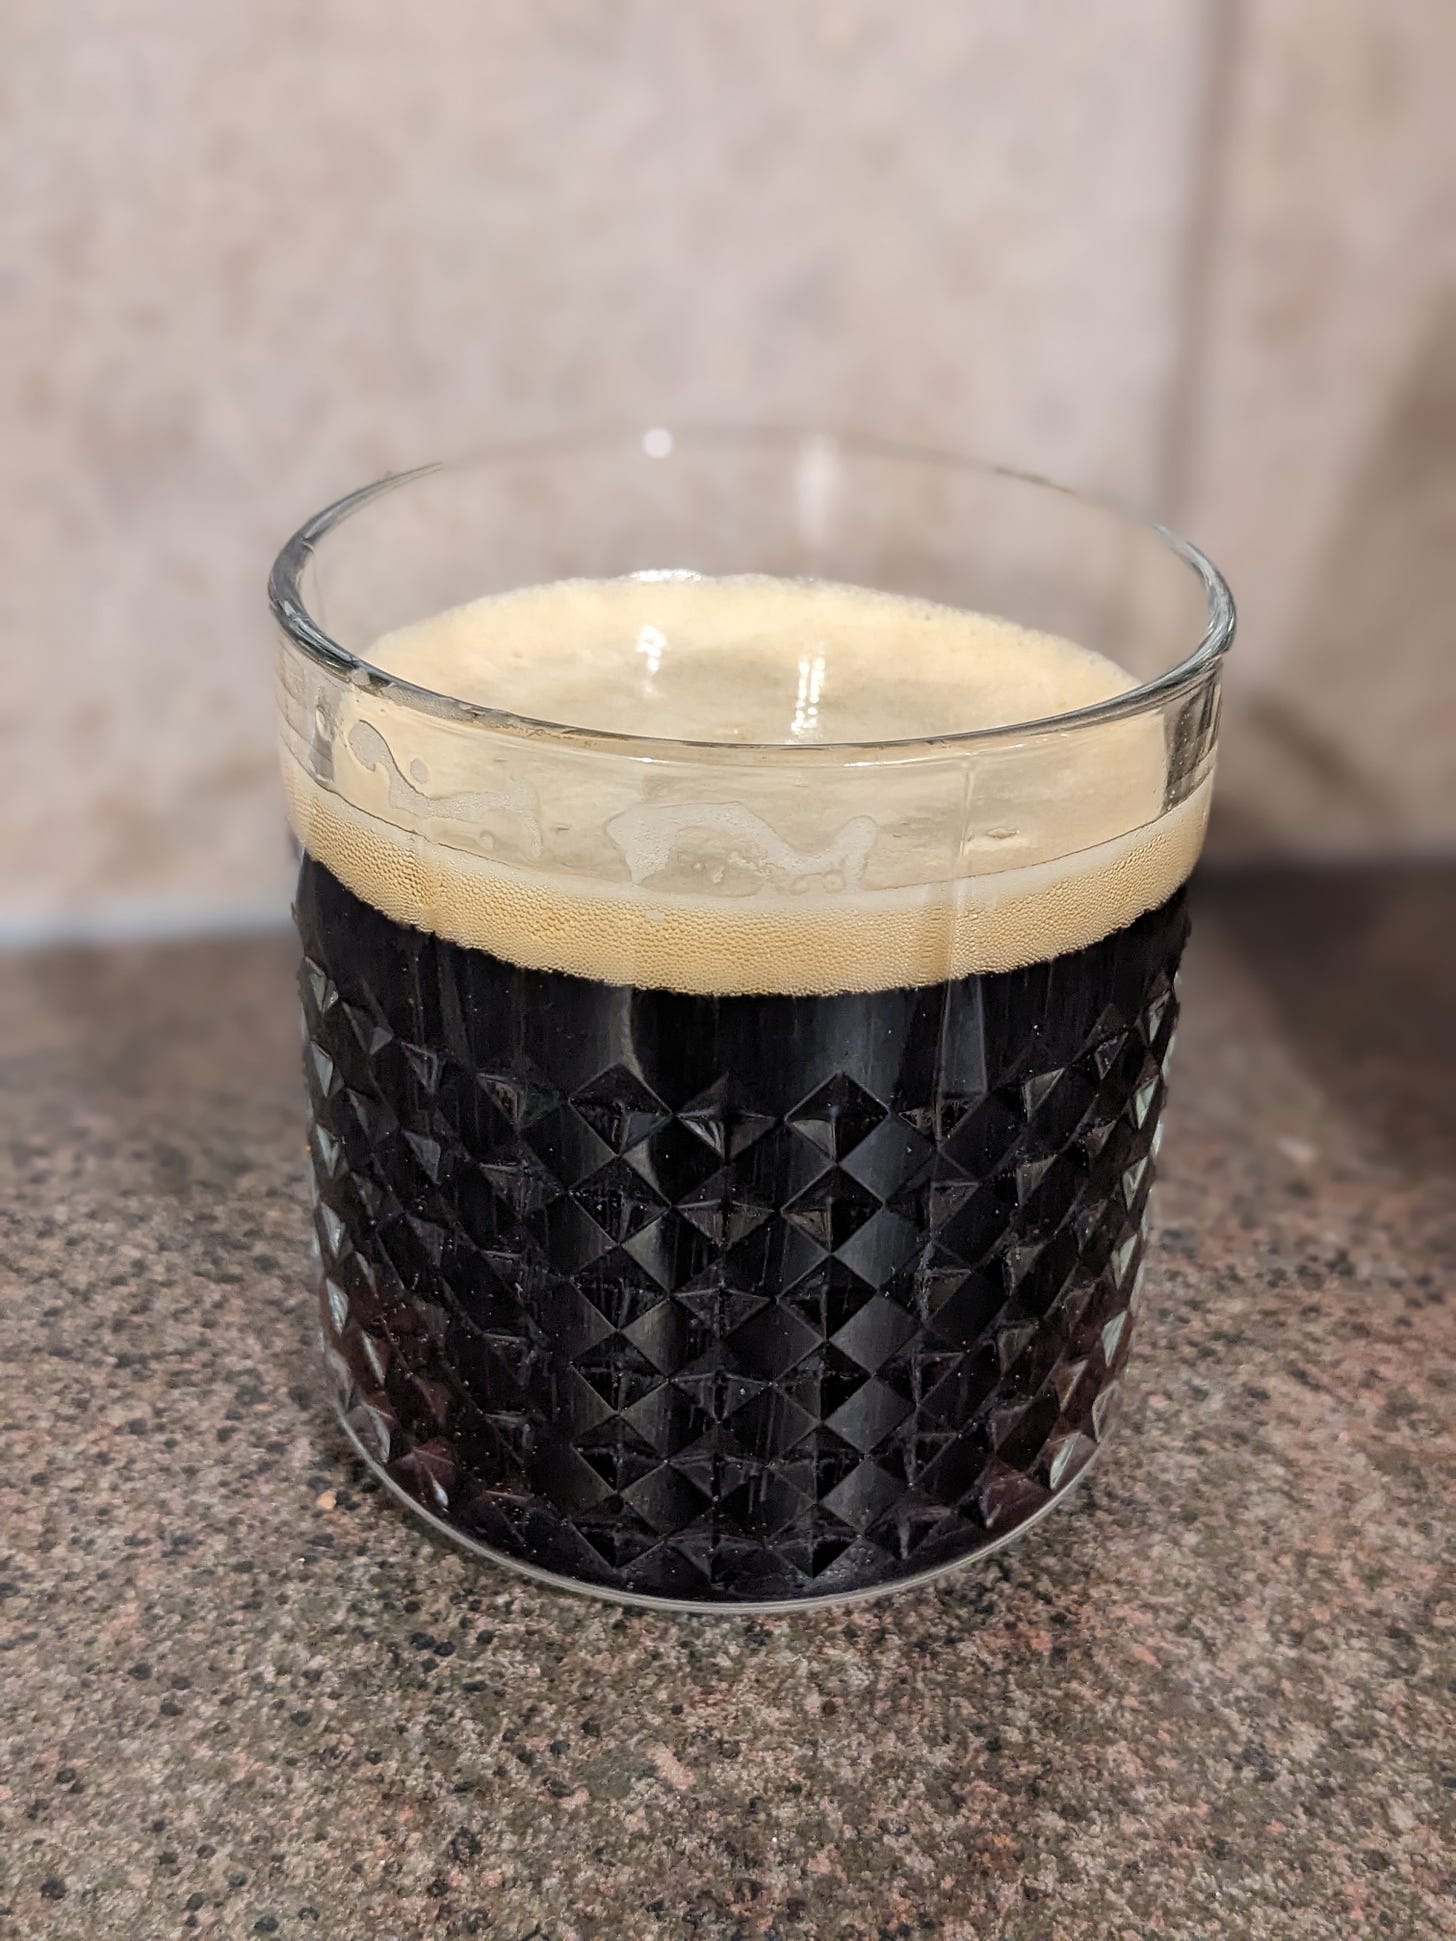 a glass of dark brown beer sits on a kitchen counter. the beer has light foam on top.